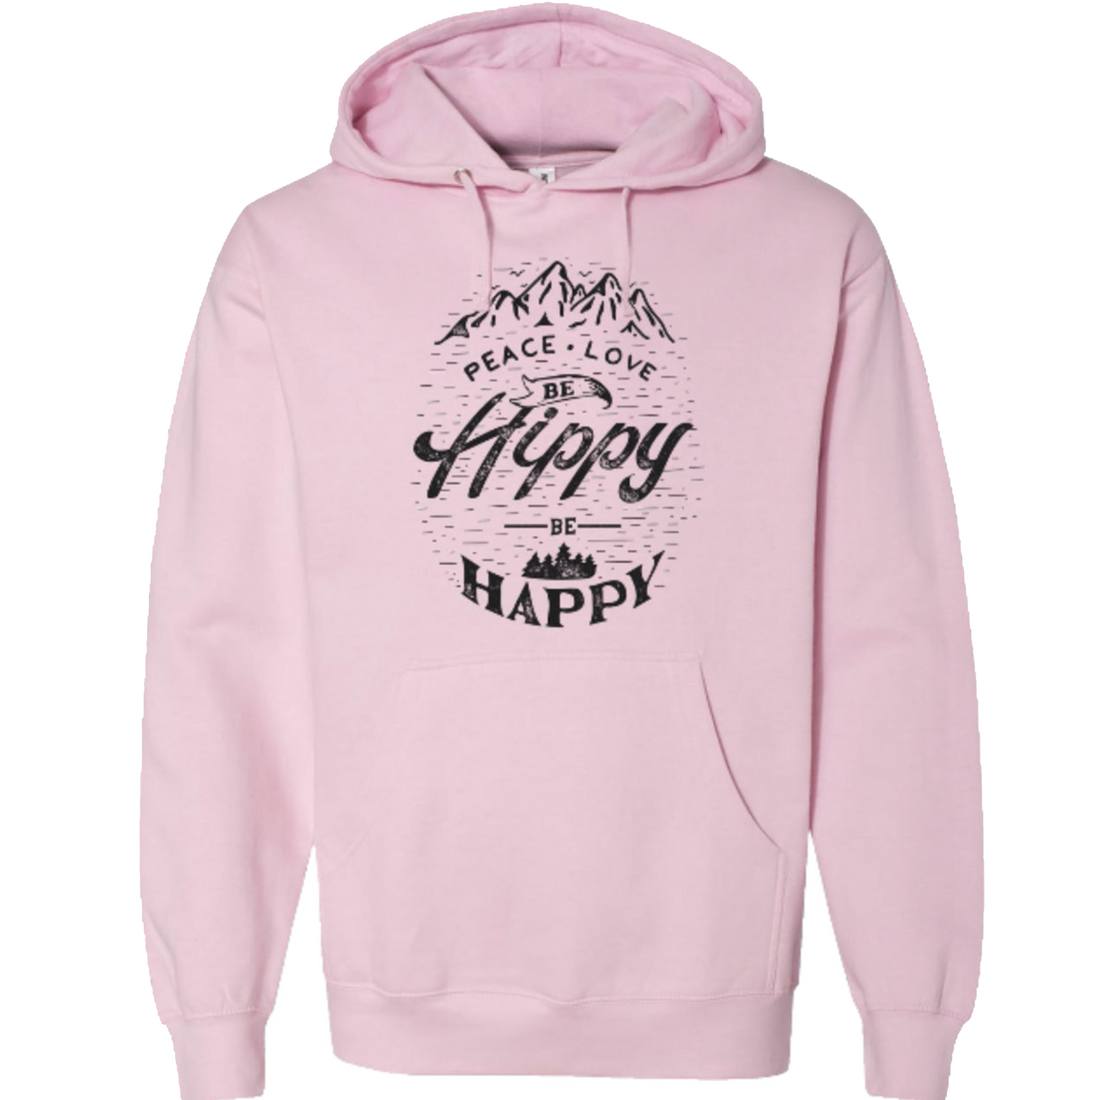 SALE Be Hippy Be Happy Light Weight Hoodie In Pink